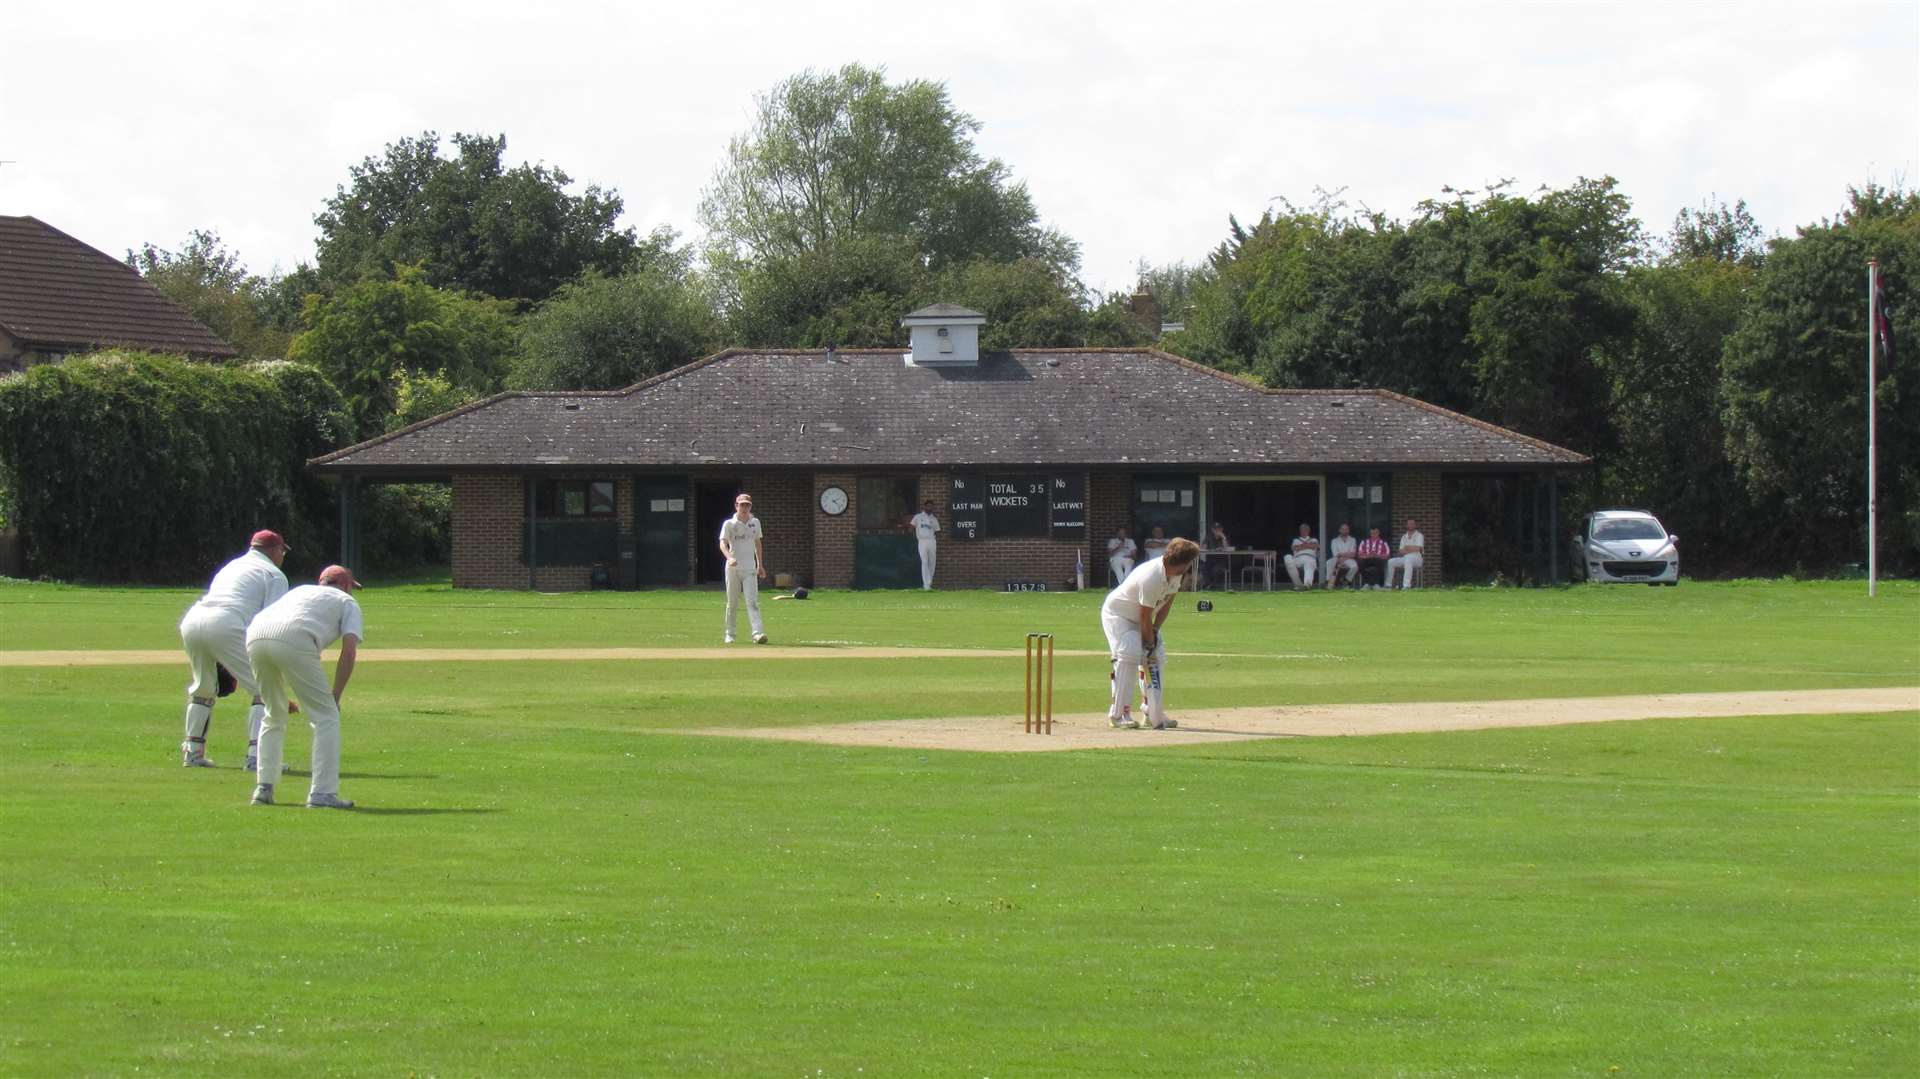 West Malling cricket ground pictured in 2019. Picture: Peter Francis/Kent County Cricket Grounds by Howard Milton and Peter Francis